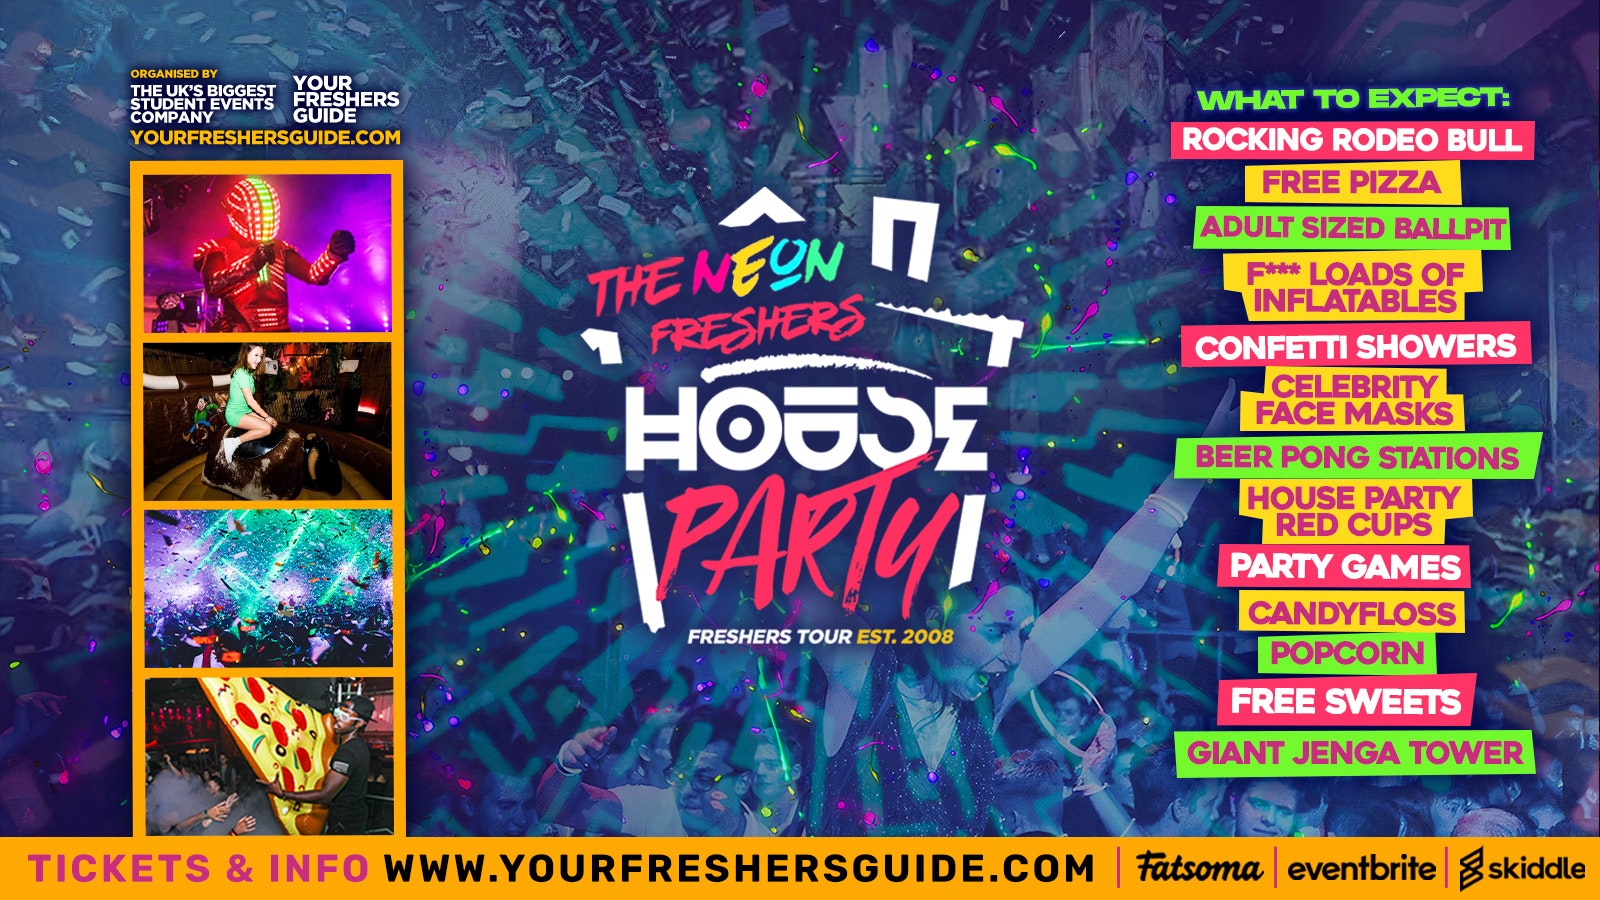 Neon Freshers House Party / Stirling Freshers 2022